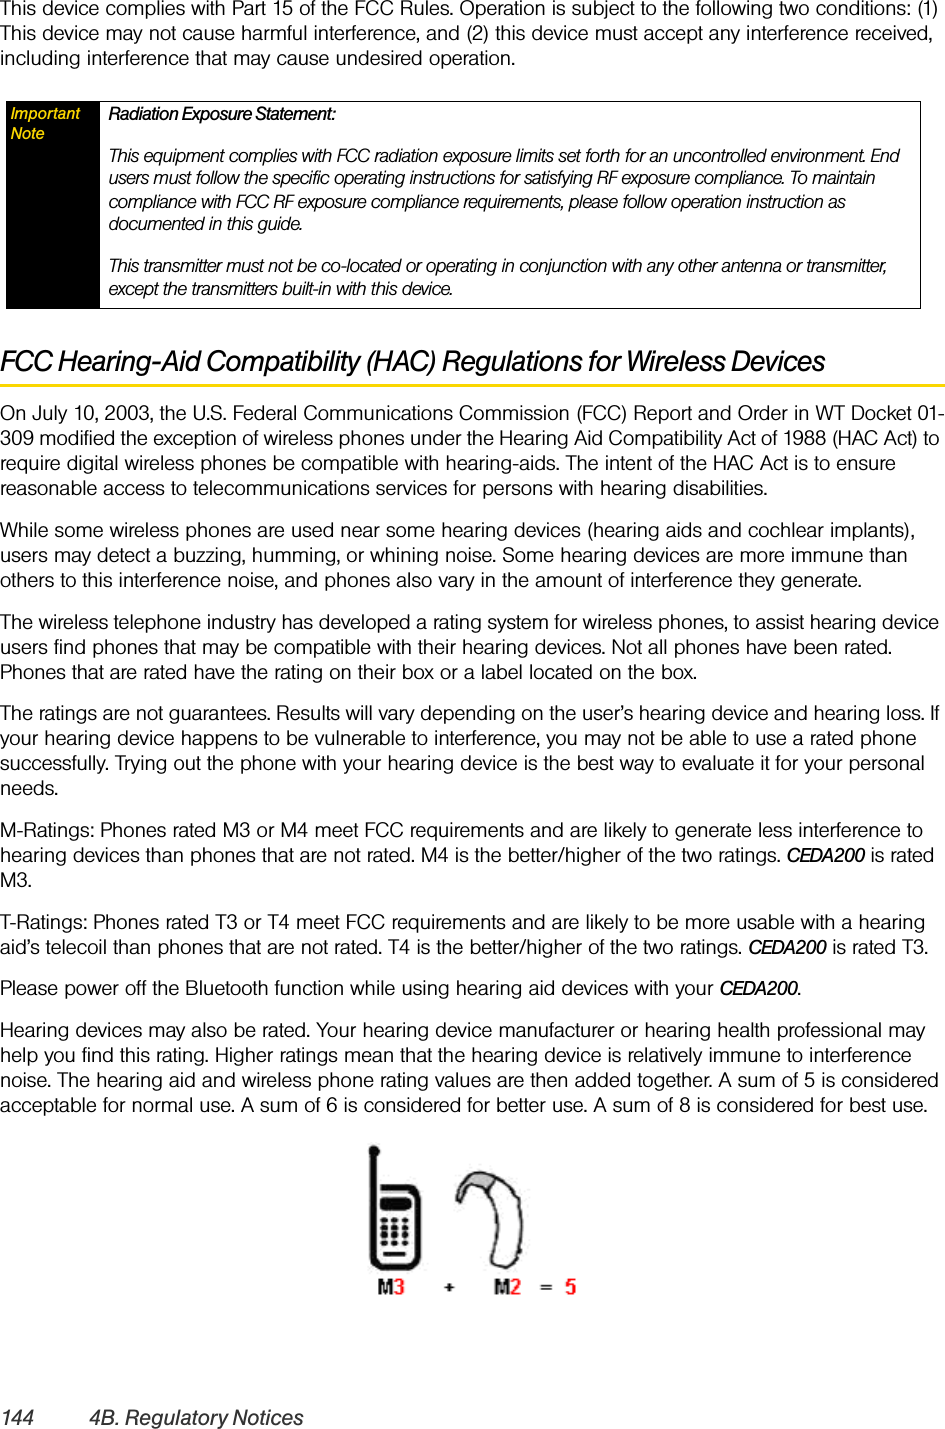 144 4B. Regulatory NoticesThis device complies with Part 15 of the FCC Rules. Operation is subject to the following two conditions: (1) This device may not cause harmful interference, and (2) this device must accept any interference received, including interference that may cause undesired operation.FCC Hearing-Aid Compatibility (HAC) Regulations for Wireless DevicesOn July 10, 2003, the U.S. Federal Communications Commission (FCC) Report and Order in WT Docket 01-309 modified the exception of wireless phones under the Hearing Aid Compatibility Act of 1988 (HAC Act) to require digital wireless phones be compatible with hearing-aids. The intent of the HAC Act is to ensure reasonable access to telecommunications services for persons with hearing disabilities.While some wireless phones are used near some hearing devices (hearing aids and cochlear implants), users may detect a buzzing, humming, or whining noise. Some hearing devices are more immune than others to this interference noise, and phones also vary in the amount of interference they generate.The wireless telephone industry has developed a rating system for wireless phones, to assist hearing device users find phones that may be compatible with their hearing devices. Not all phones have been rated. Phones that are rated have the rating on their box or a label located on the box.The ratings are not guarantees. Results will vary depending on the user’s hearing device and hearing loss. If your hearing device happens to be vulnerable to interference, you may not be able to use a rated phone successfully. Trying out the phone with your hearing device is the best way to evaluate it for your personal needs.M-Ratings: Phones rated M3 or M4 meet FCC requirements and are likely to generate less interference to hearing devices than phones that are not rated. M4 is the better/higher of the two ratings. CEDA200 is rated M3.T-Ratings: Phones rated T3 or T4 meet FCC requirements and are likely to be more usable with a hearing aid’s telecoil than phones that are not rated. T4 is the better/higher of the two ratings. CEDA200 is rated T3.Please power off the Bluetooth function while using hearing aid devices with your CEDA200.Hearing devices may also be rated. Your hearing device manufacturer or hearing health professional may help you find this rating. Higher ratings mean that the hearing device is relatively immune to interference noise. The hearing aid and wireless phone rating values are then added together. A sum of 5 is considered acceptable for normal use. A sum of 6 is considered for better use. A sum of 8 is considered for best use.Important NoteRadiation Exposure Statement:This equipment complies with FCC radiation exposure limits set forth for an uncontrolled environment. End users must follow the specific operating instructions for satisfying RF exposure compliance. To maintain compliance with FCC RF exposure compliance requirements, please follow operation instruction as documented in this guide. This transmitter must not be co-located or operating in conjunction with any other antenna or transmitter, except the transmitters built-in with this device.